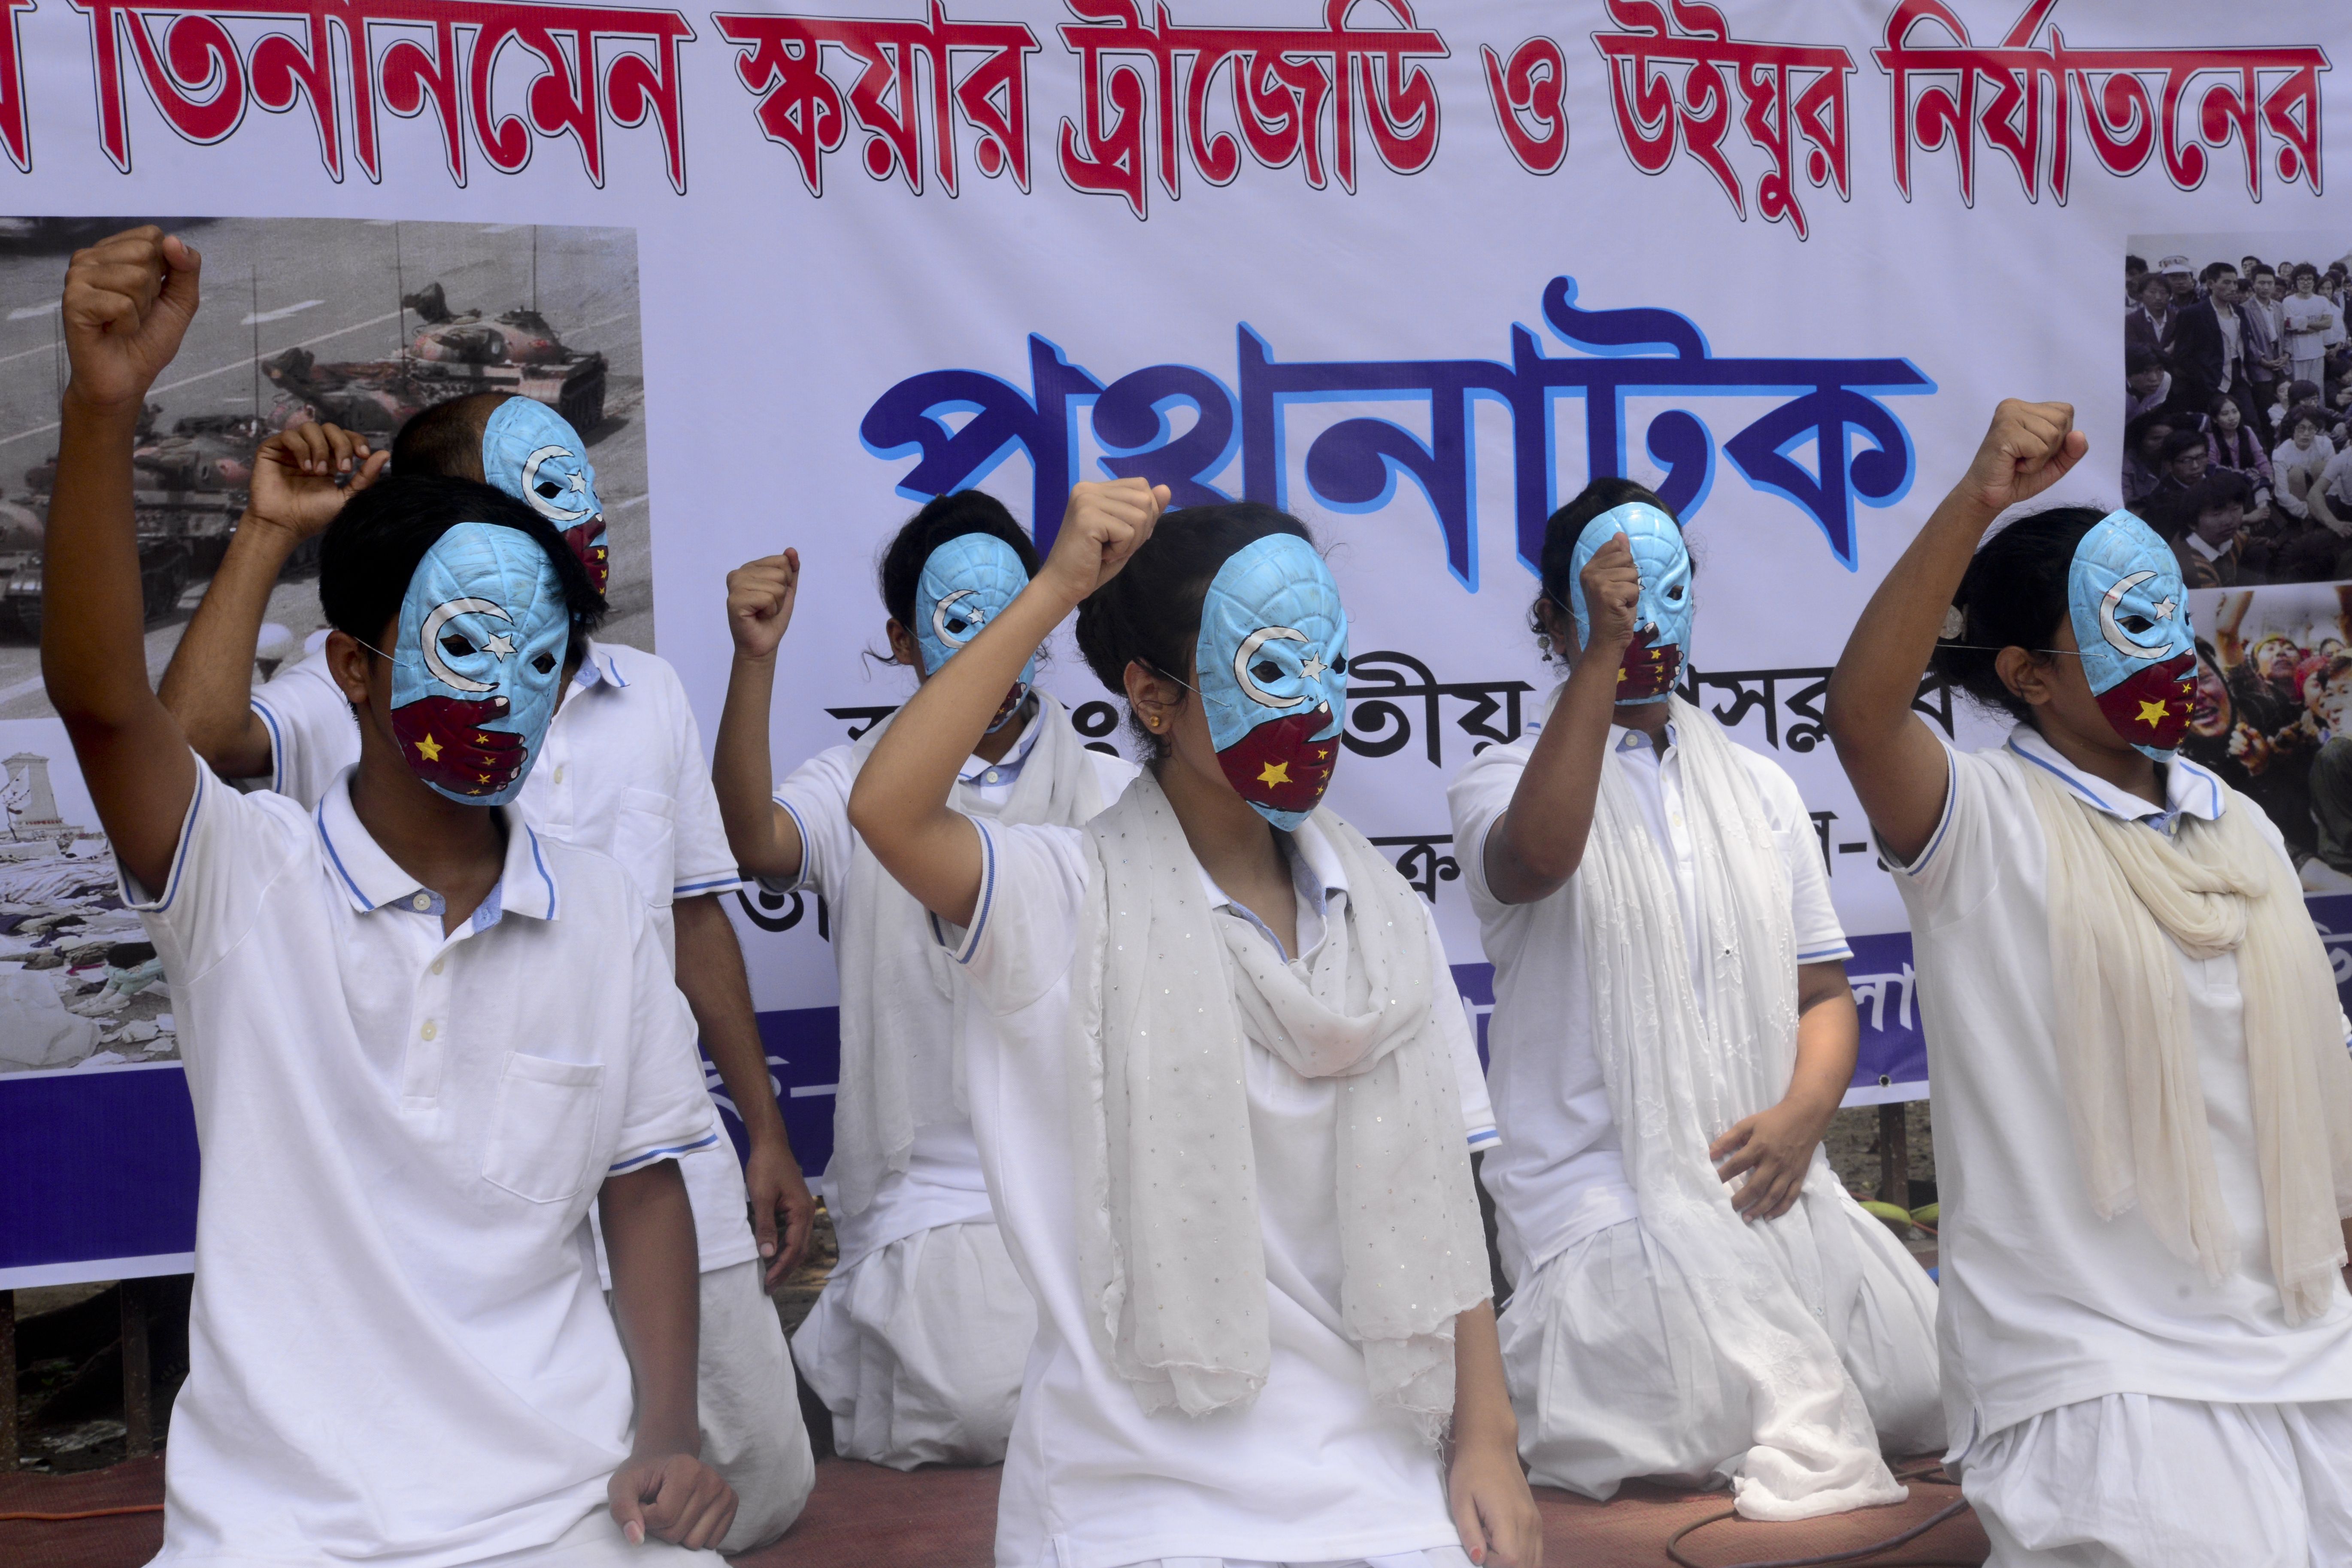 Photo of a group of social activists wearing blue masks and white clothing holding their fists up in protest against the Chinese government